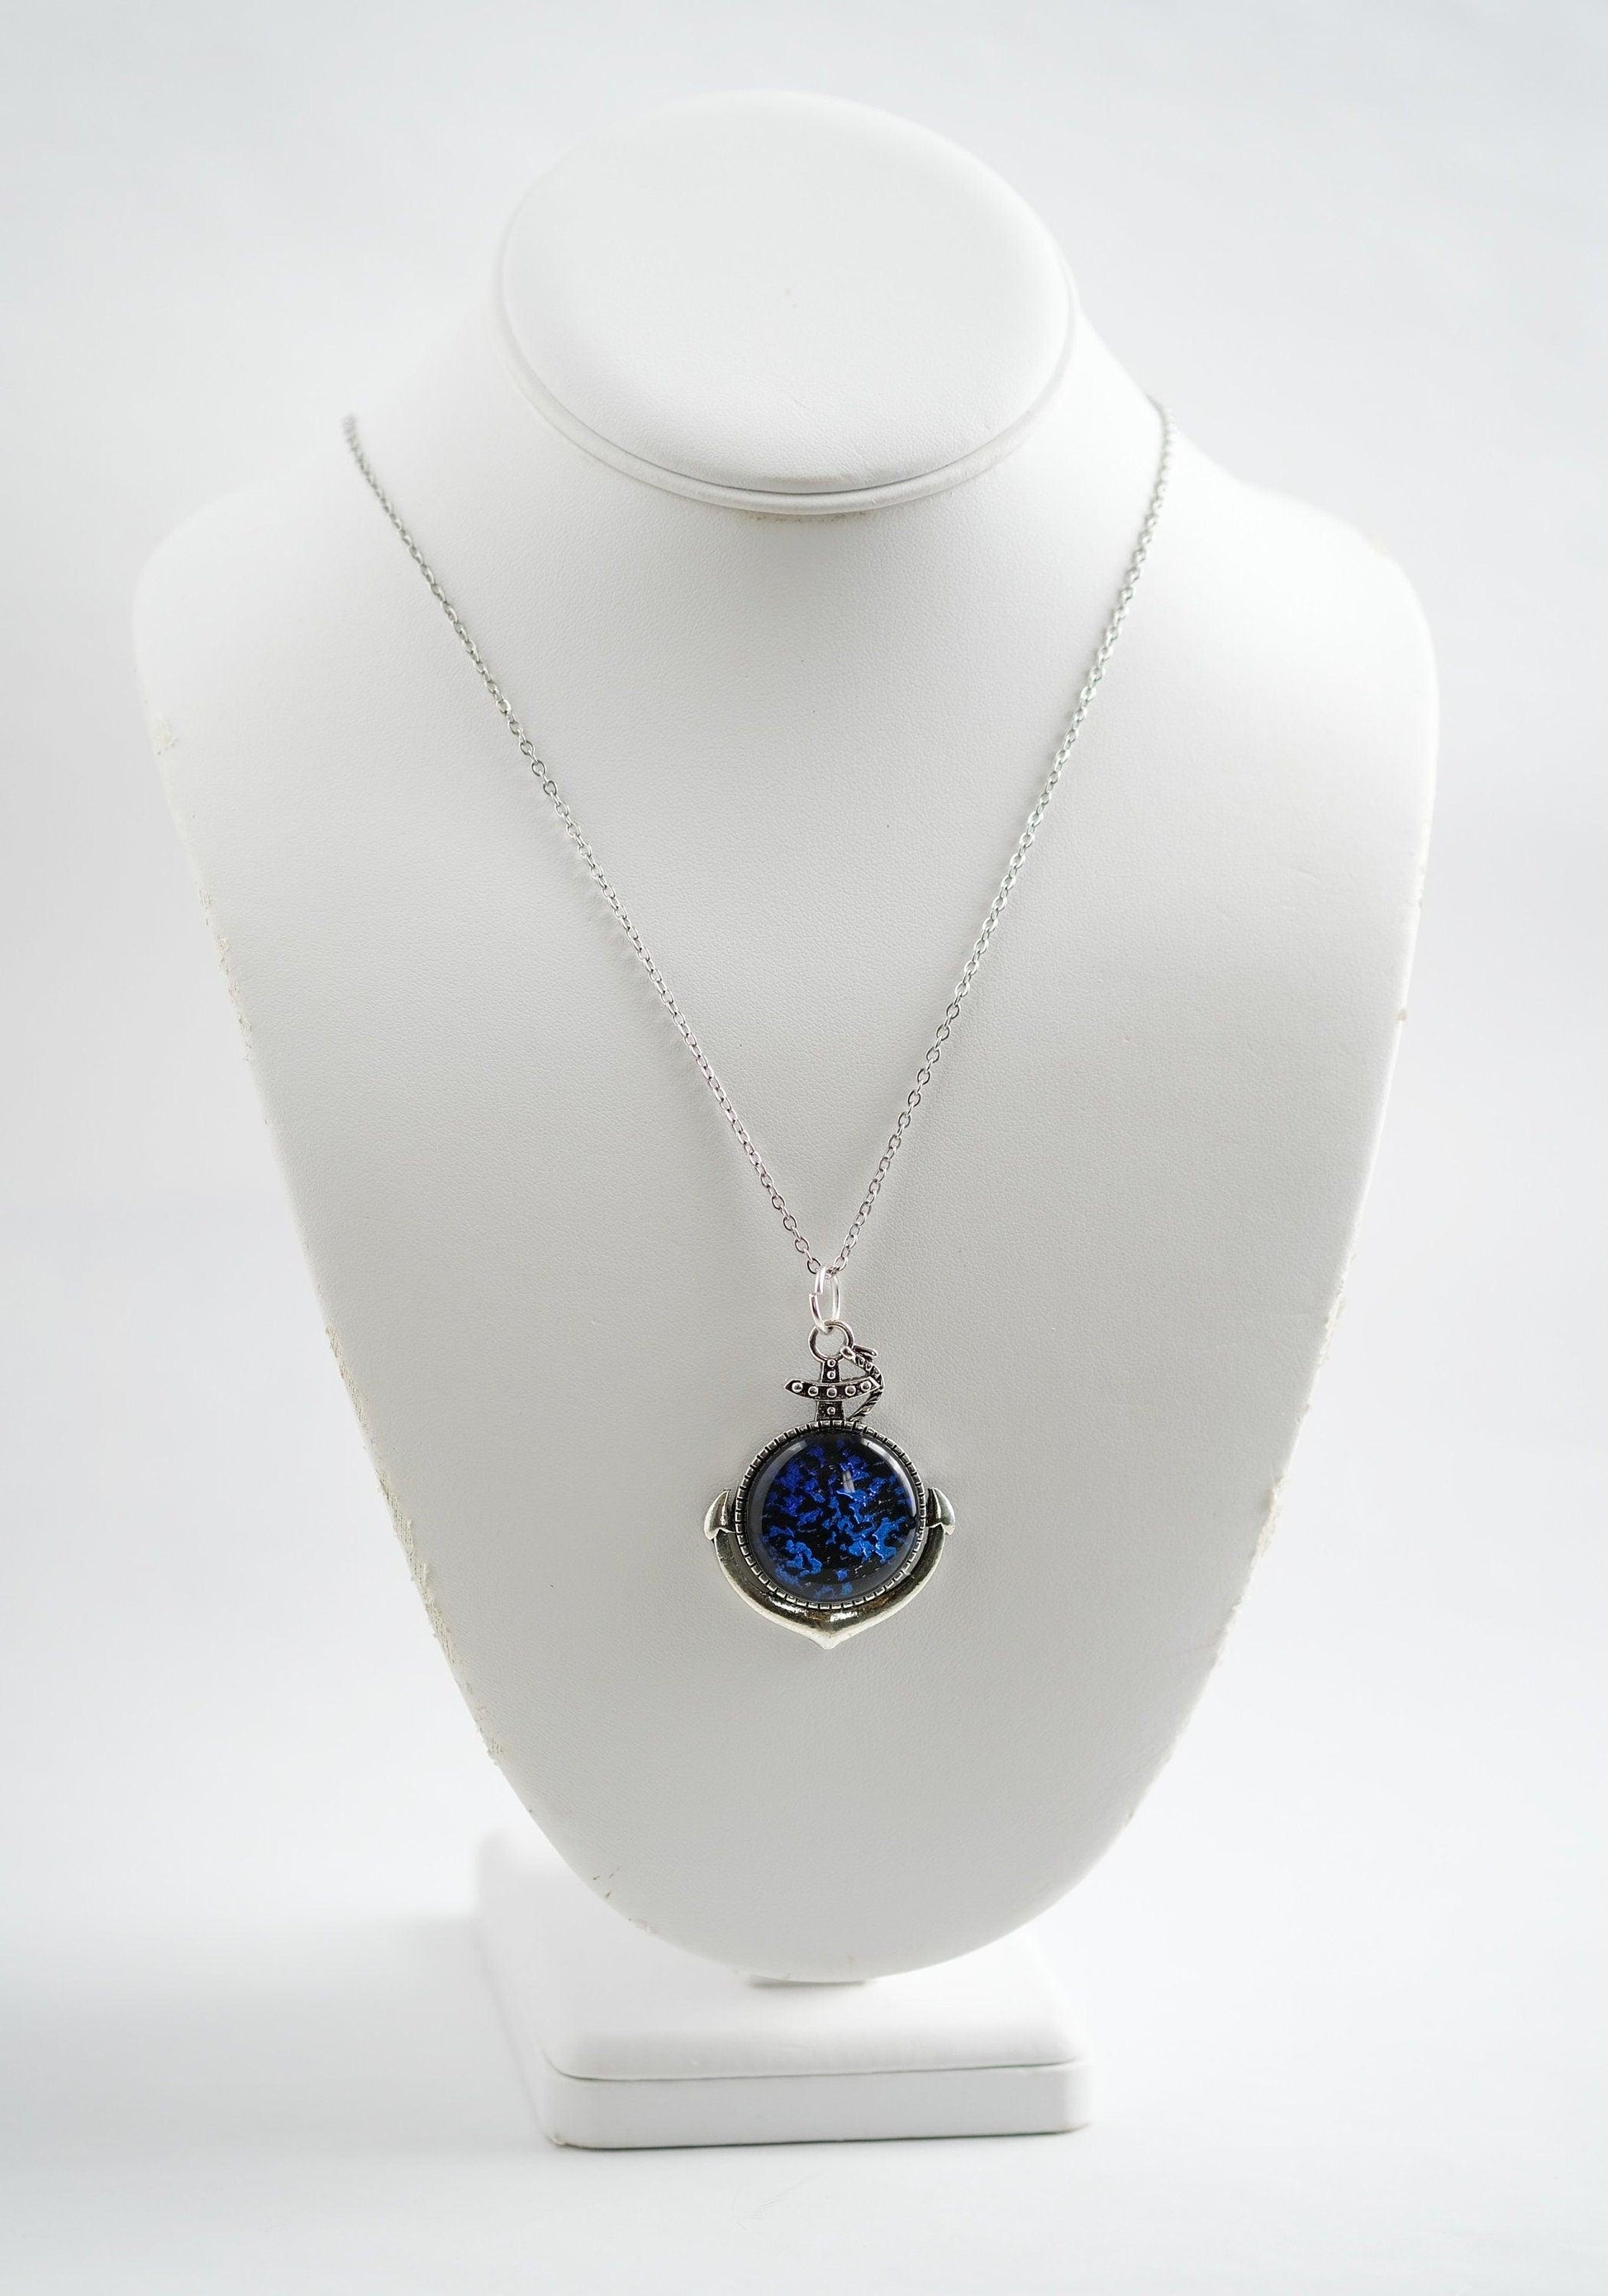 Silver Anchor pendant necklace, with blue and black sparkling dichroic fused glass center stone on a 20 inch steel chain seeds glassworks seedsglassworks